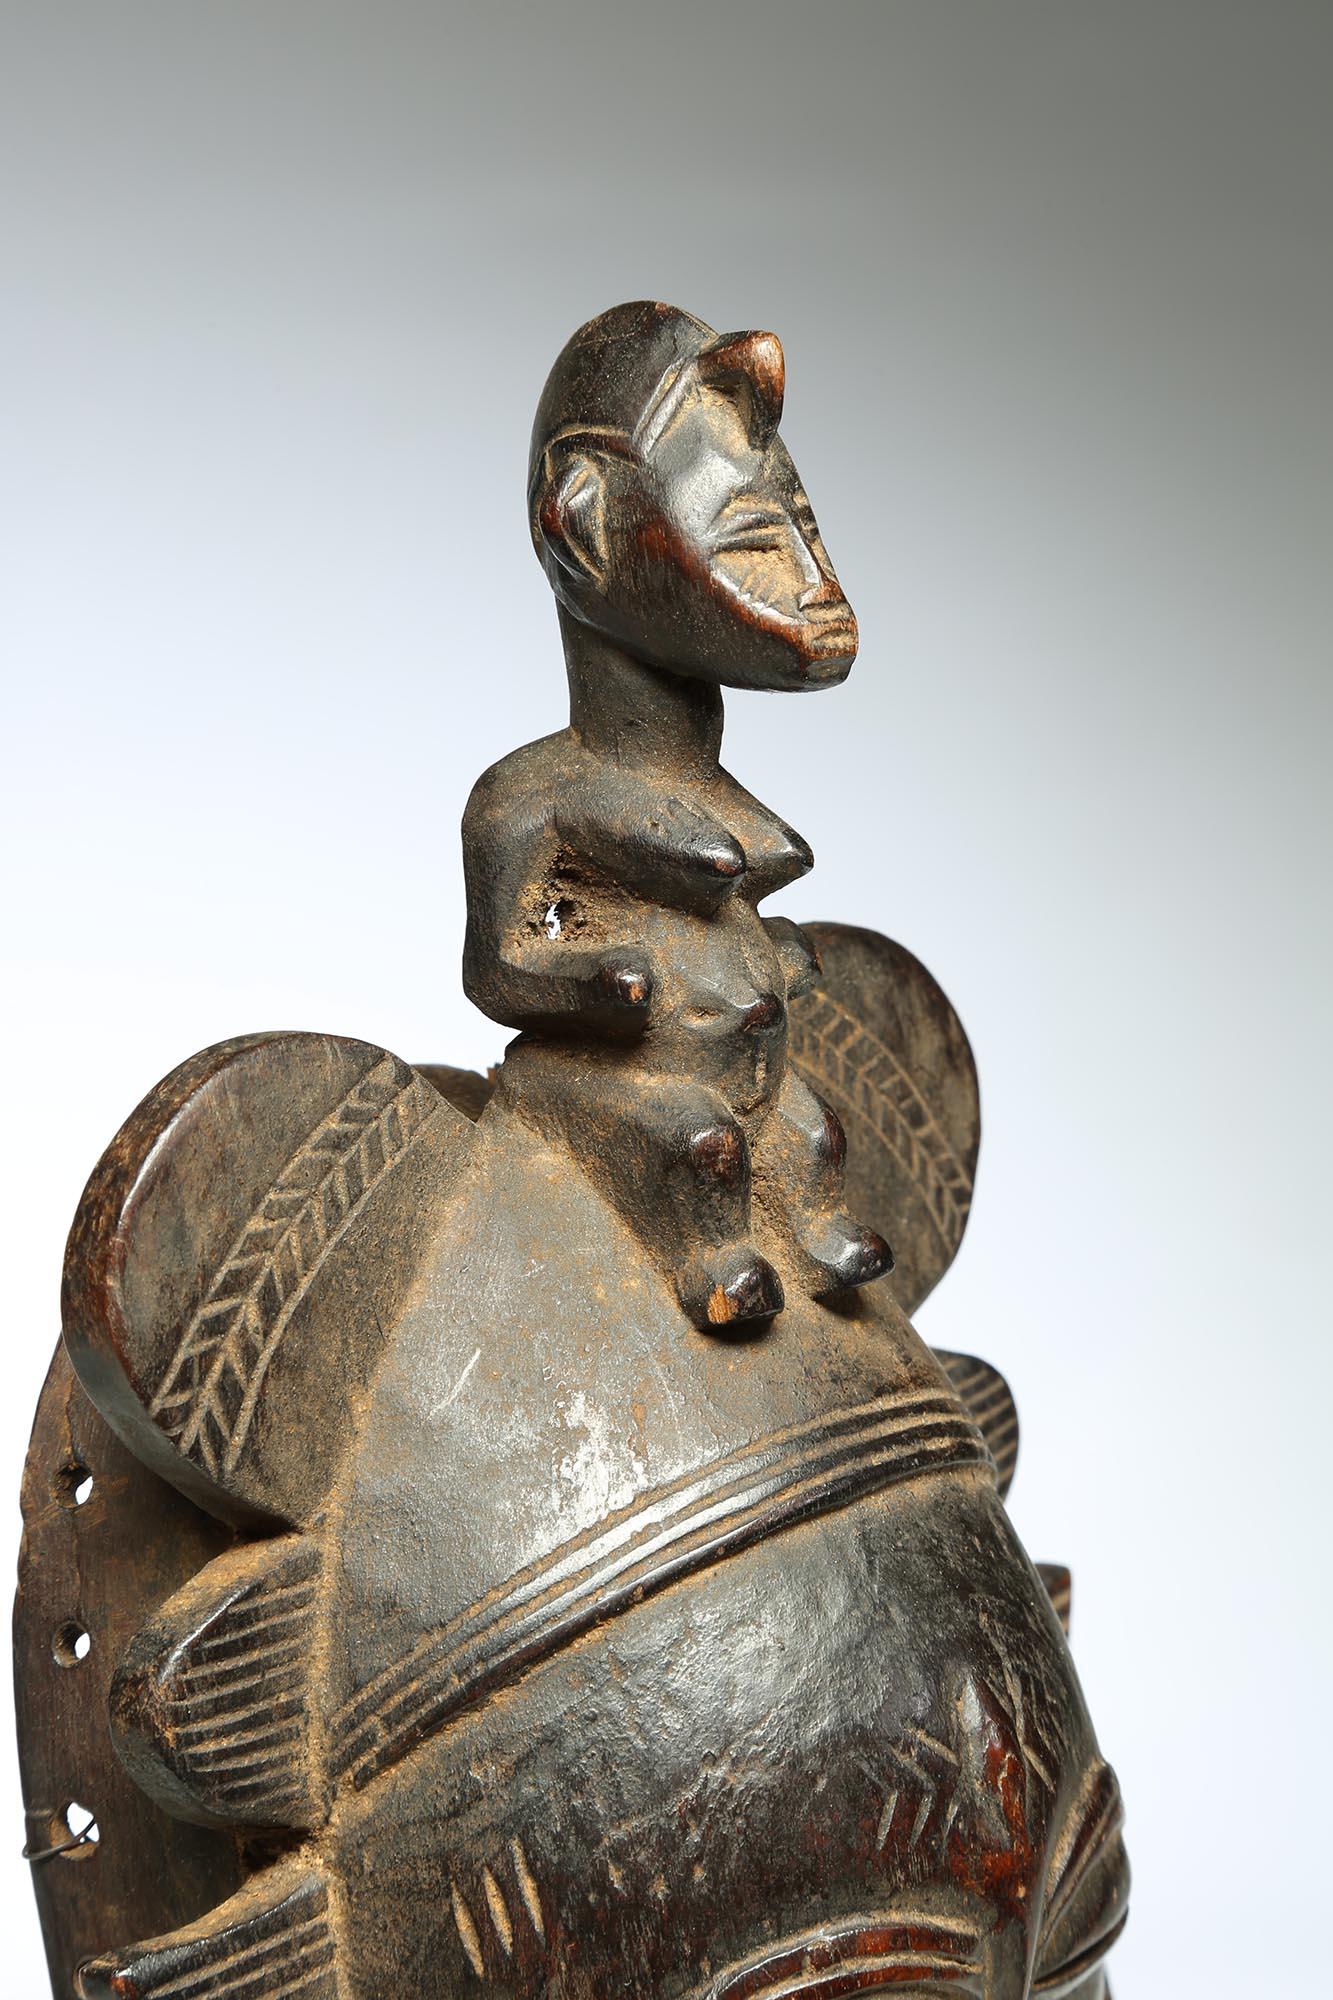 Finely carved and worn Senufo Kepelie dance mask with refined stylized face and small seated female figure on top. Old surface with encrusted patina, worn areas, eye shaped scarification marks below carved eyes and small vertical lip plug. On custom